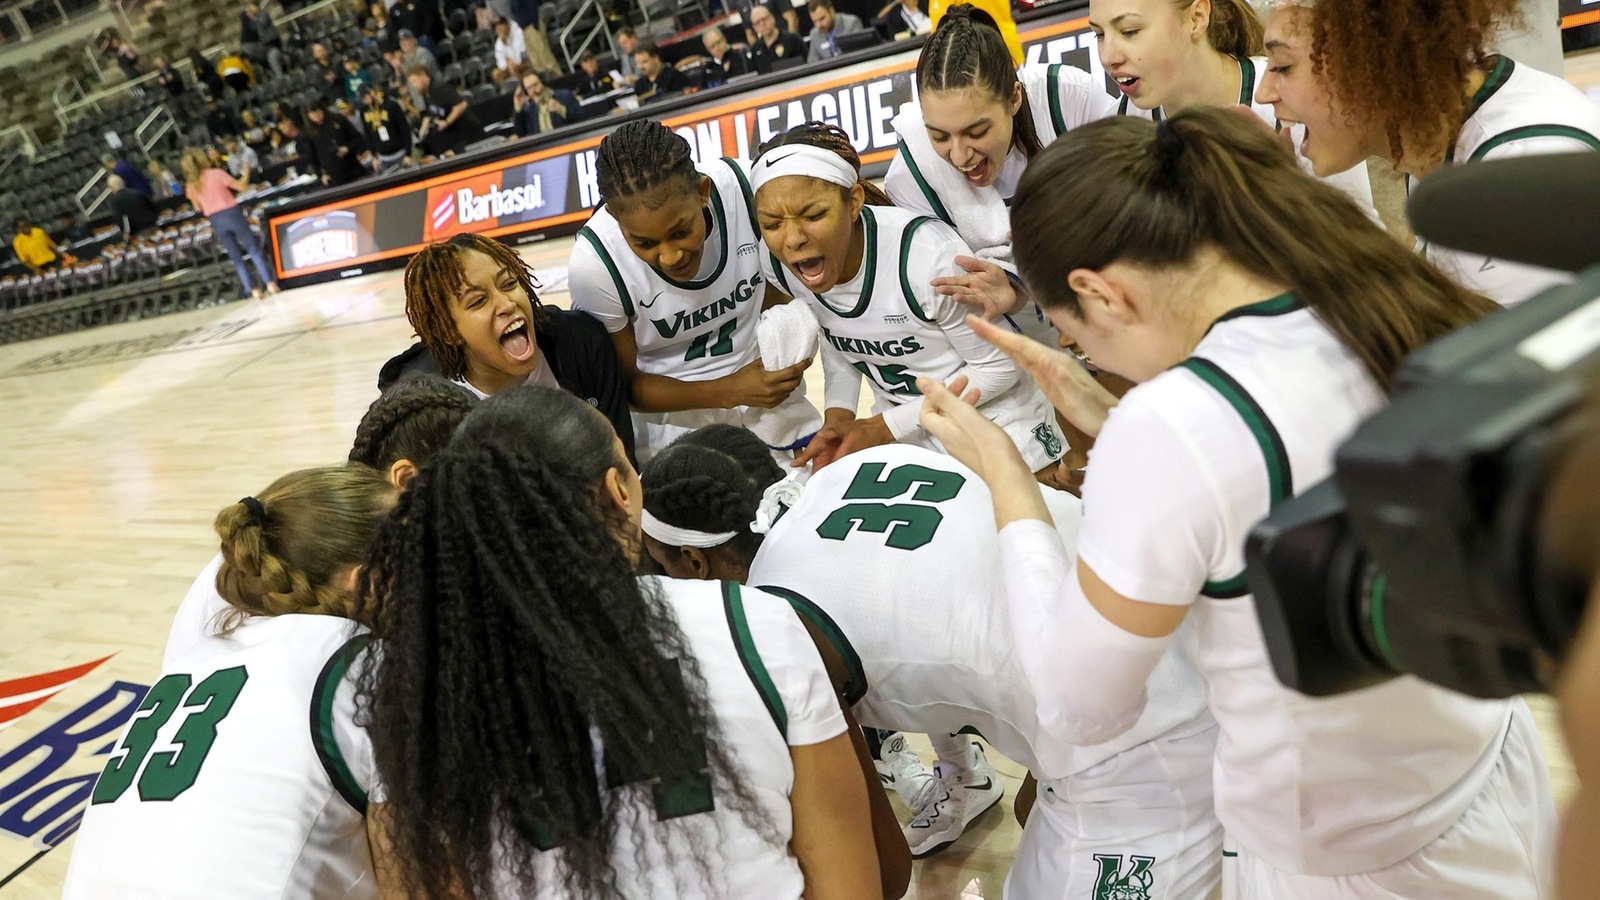 Cleveland State Women’s Basketball Advances To #HLWBB Championship With Overtime Win Against NKU